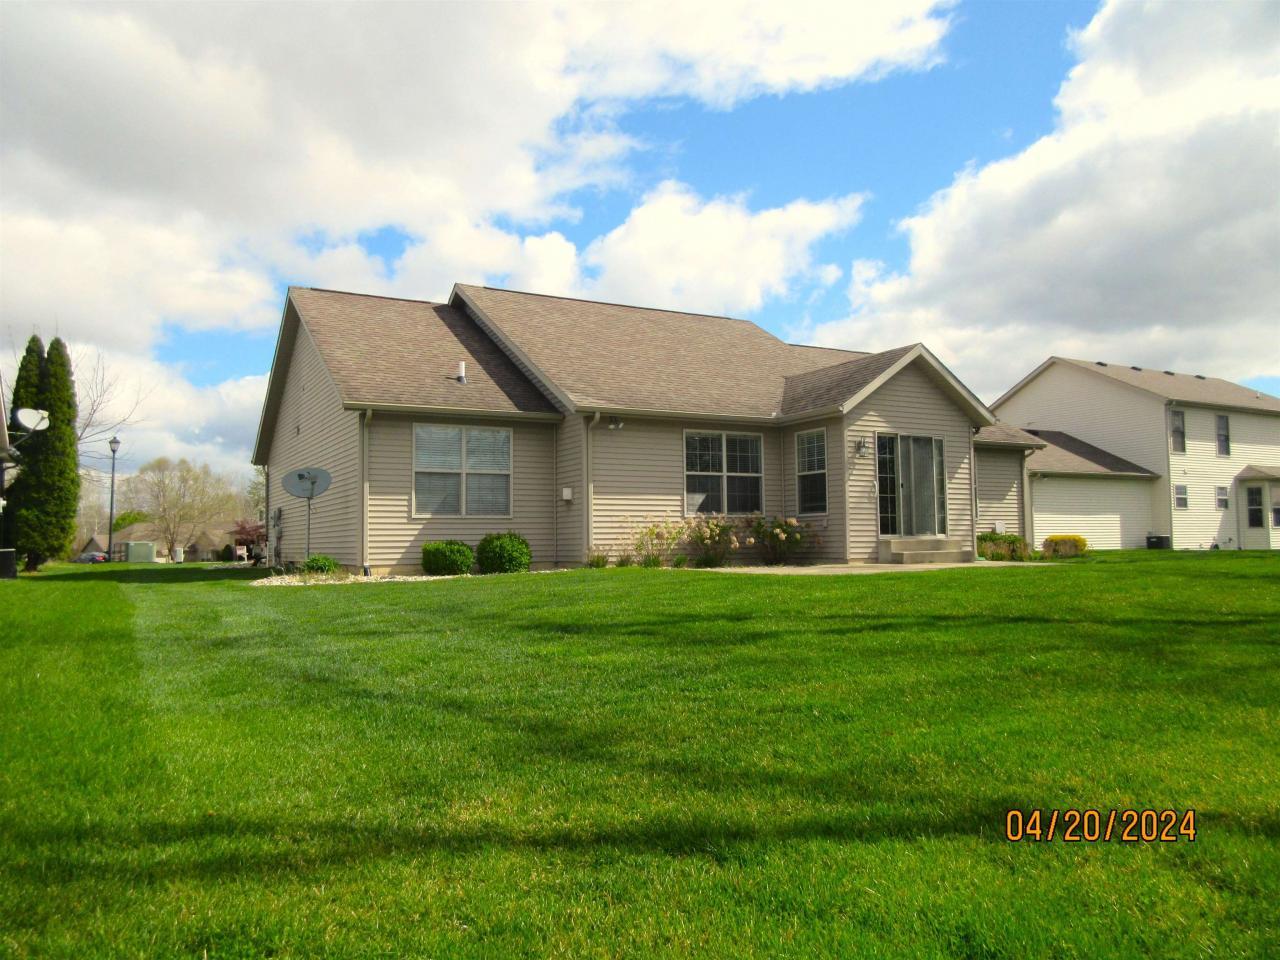 Rolling Hills Dr, South Bend, IN 46628 #1